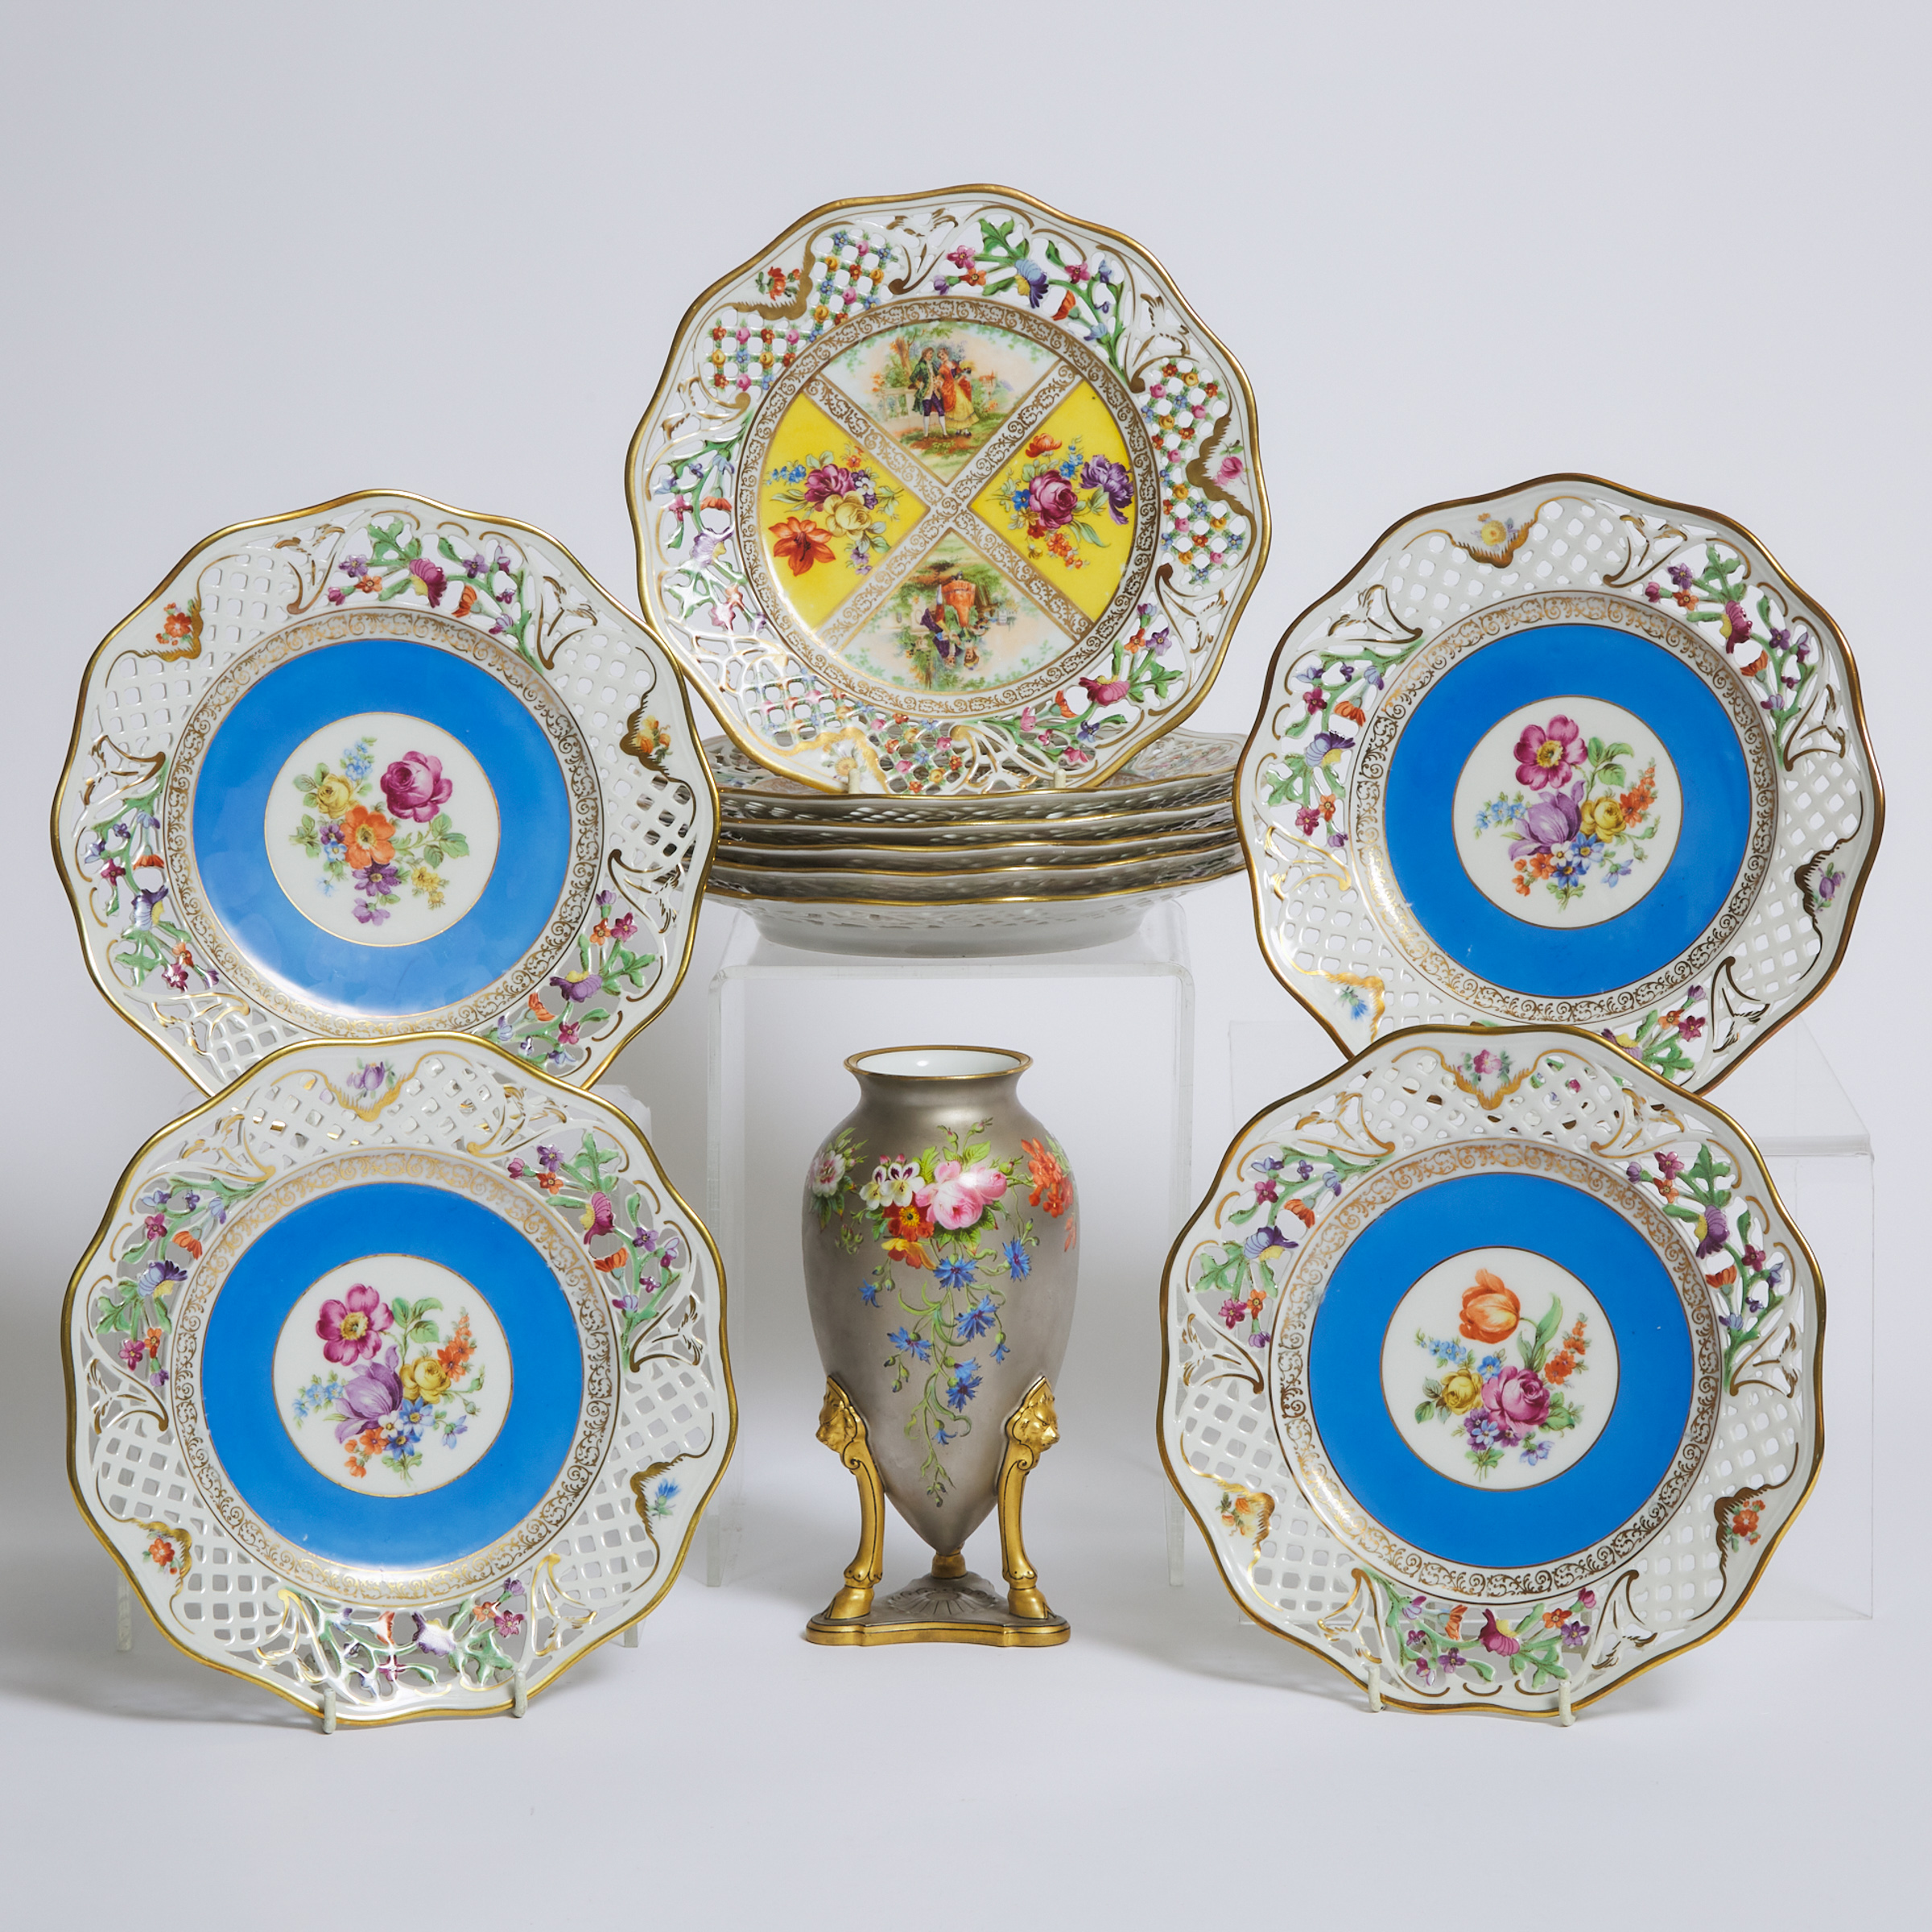 Ten Schumann Reticulated Plates and a French Porcelain Vase, late 19th/early 20th century